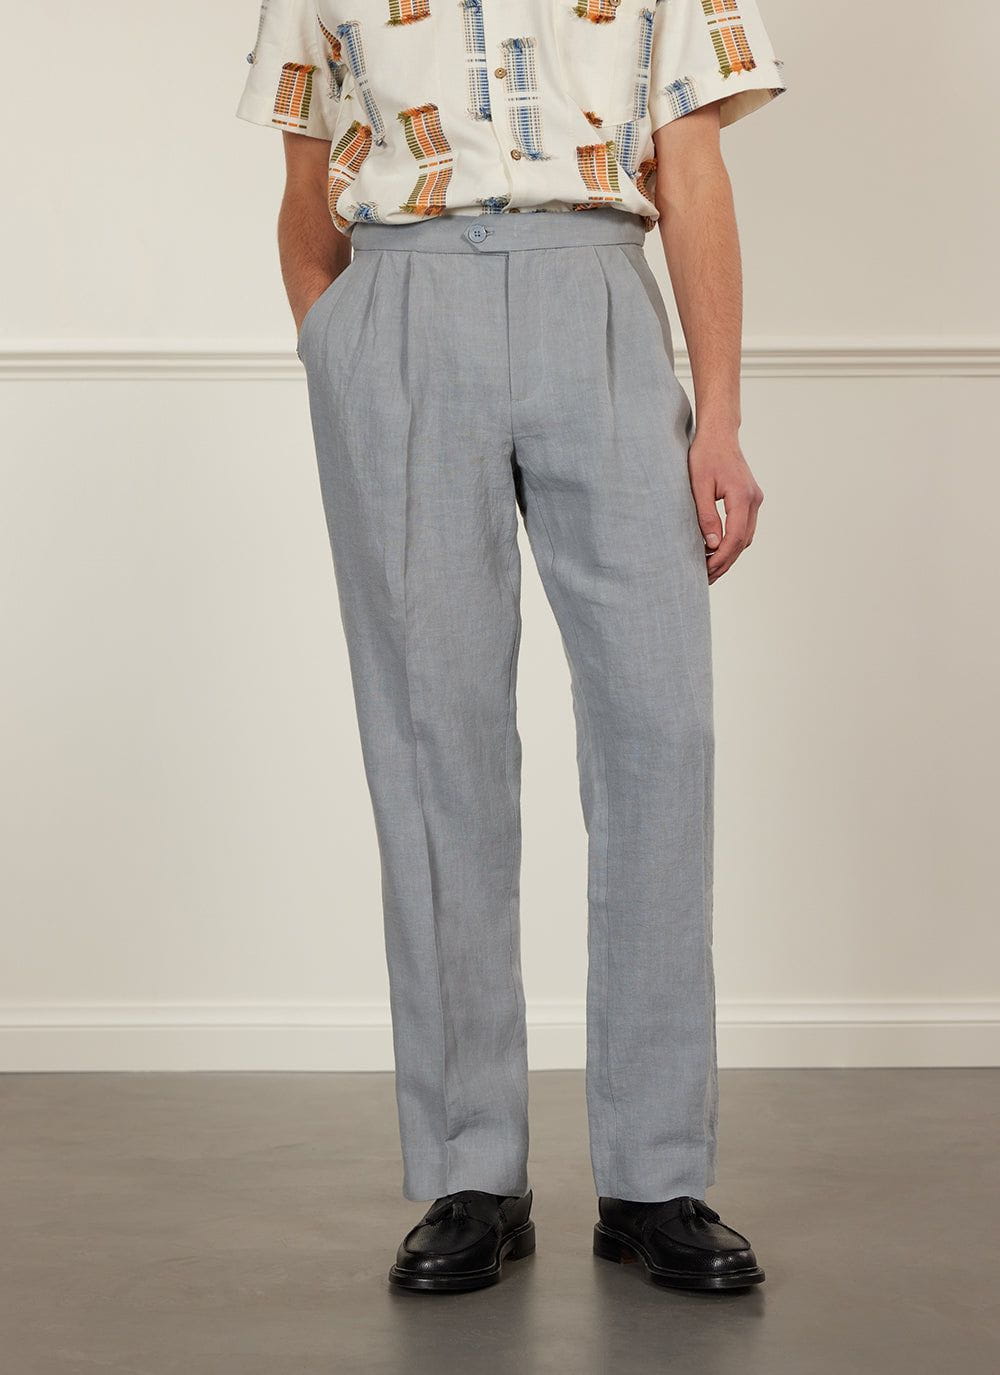 Wide Leg Pleated Drawstring Pant - Grey Wool – SHADES OF GREY BY MICAH COHEN